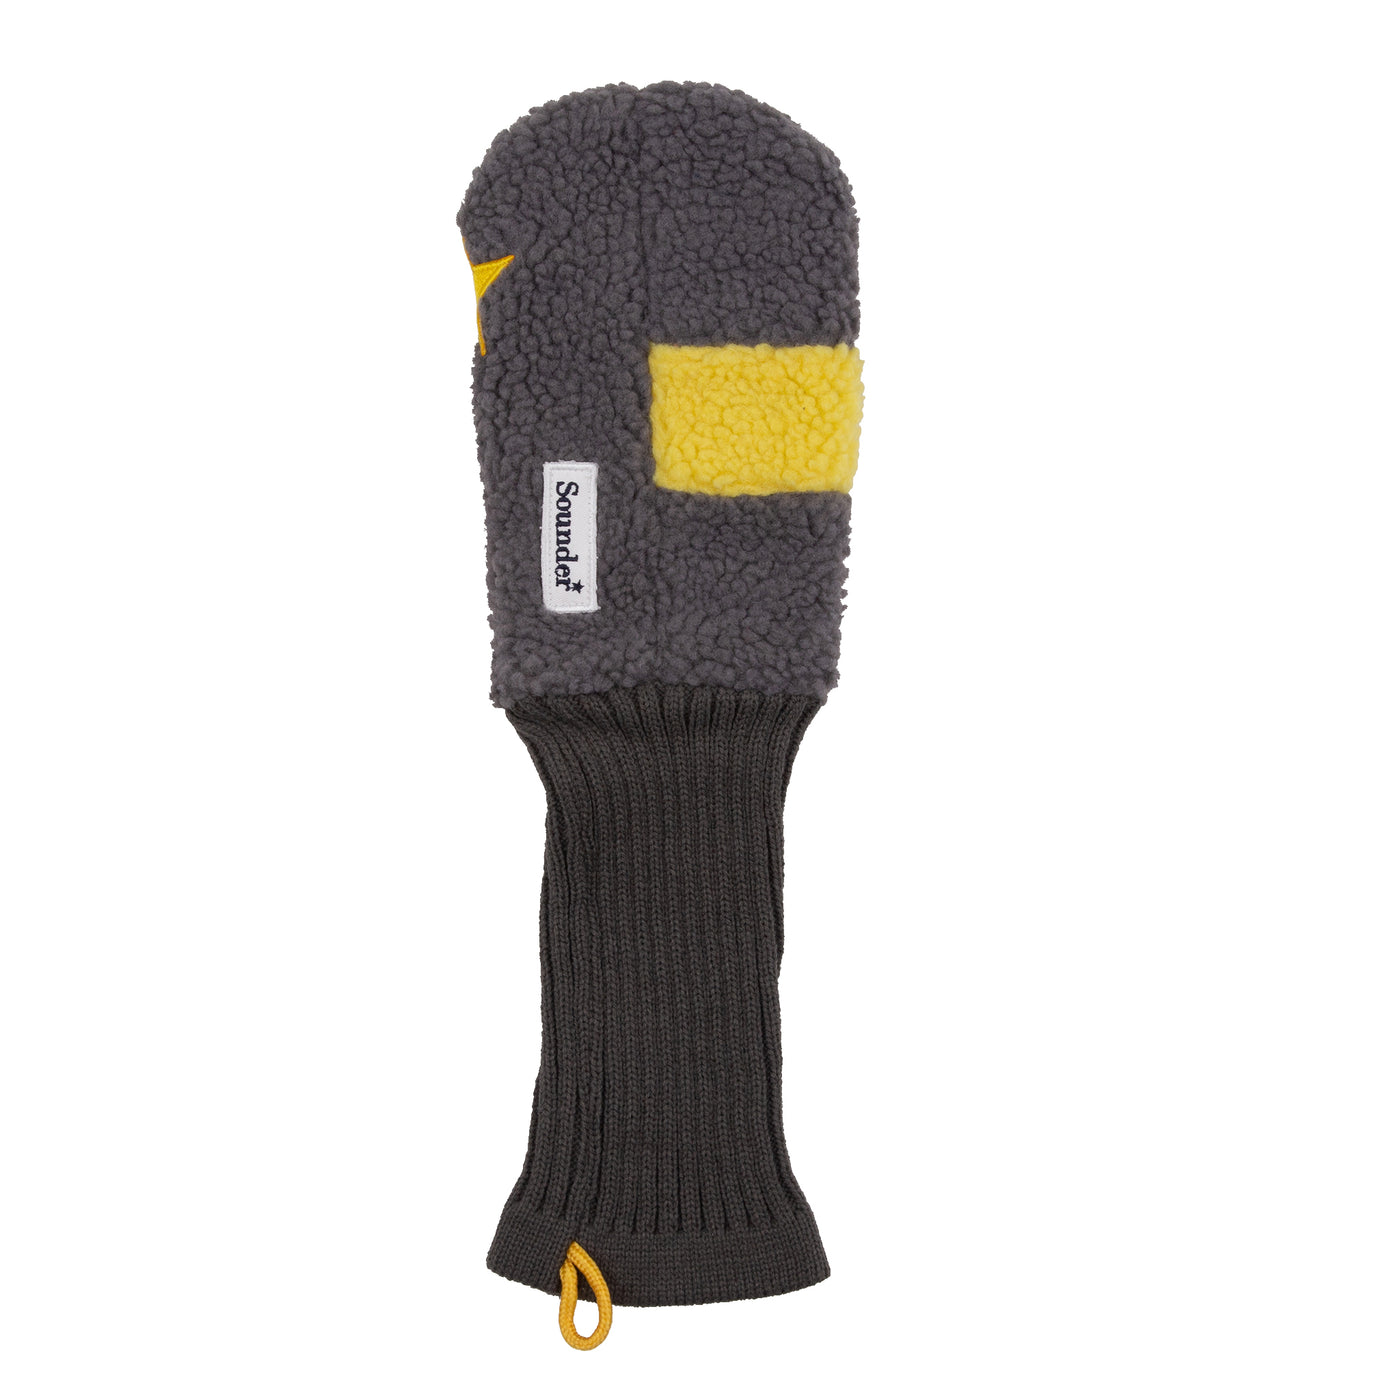 Fairway Headcover - Charcoal / Gold